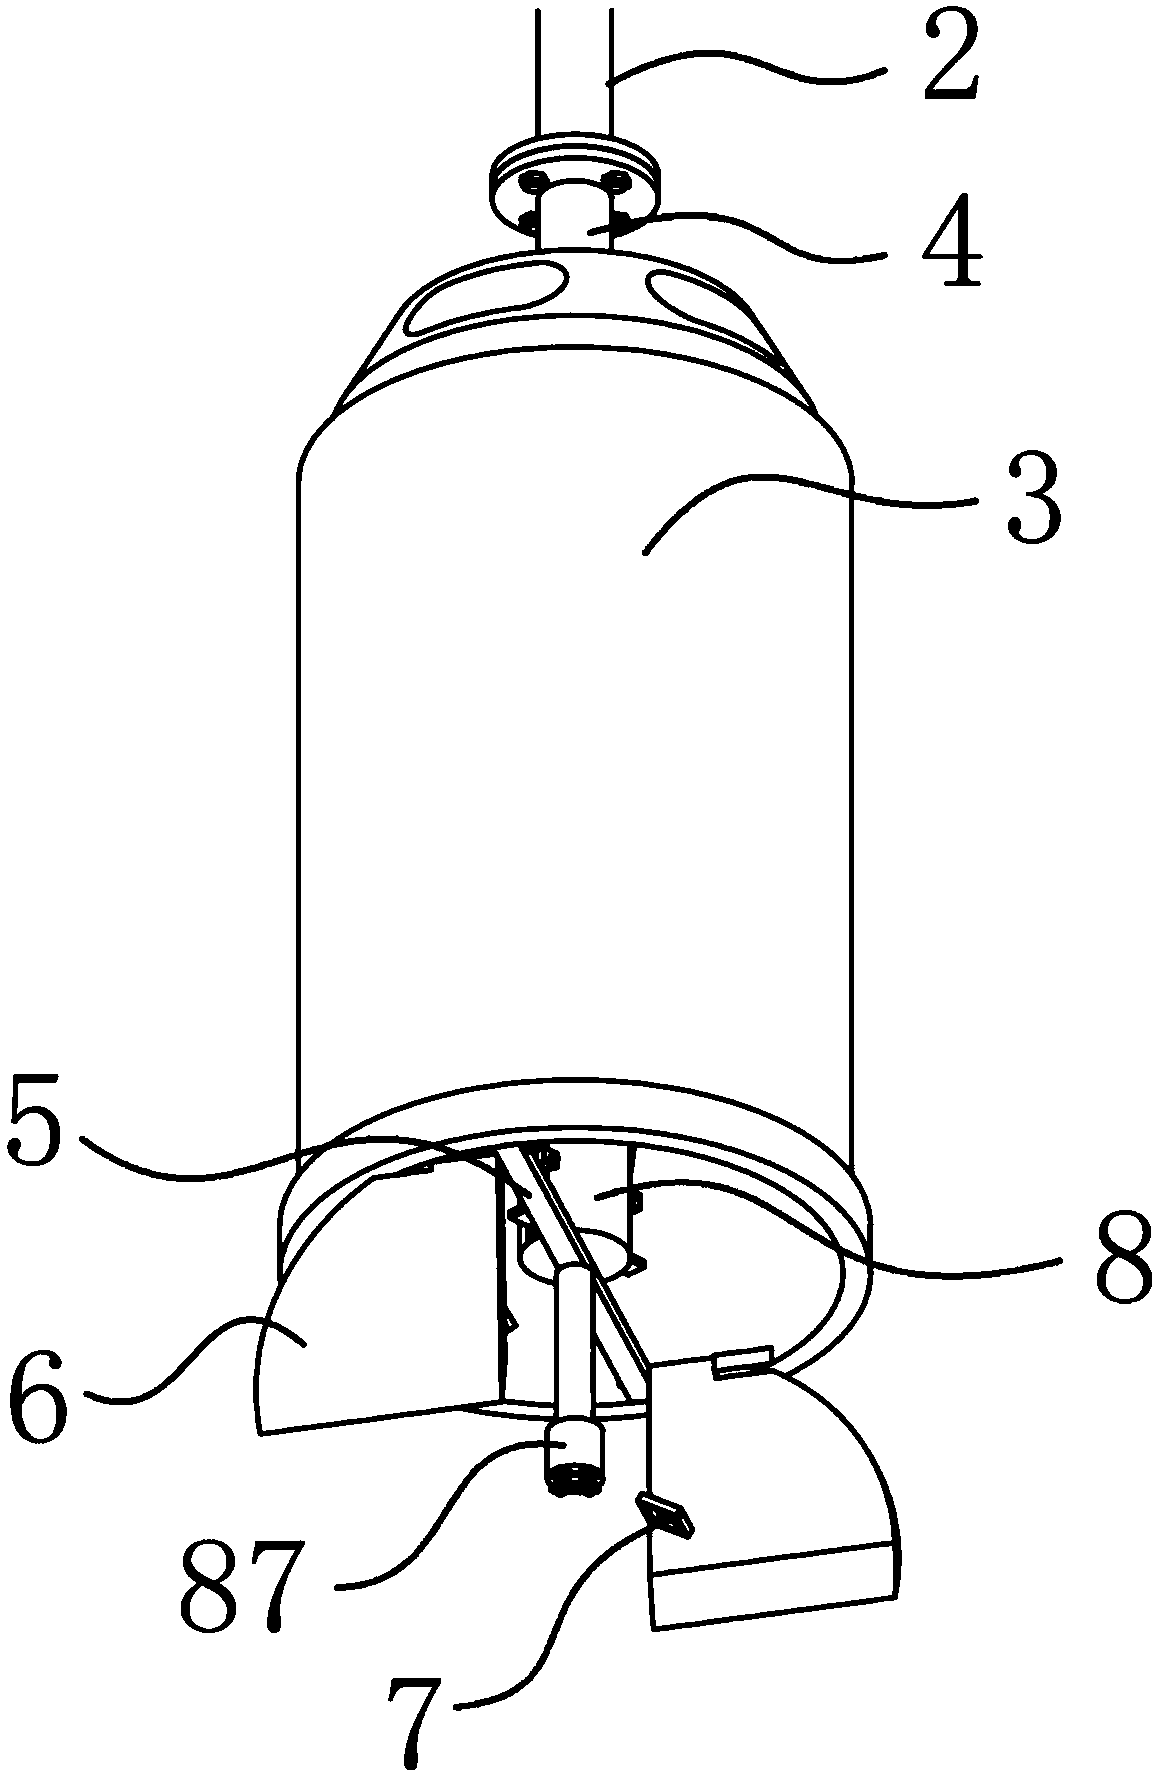 A drill bucket type pile digging device